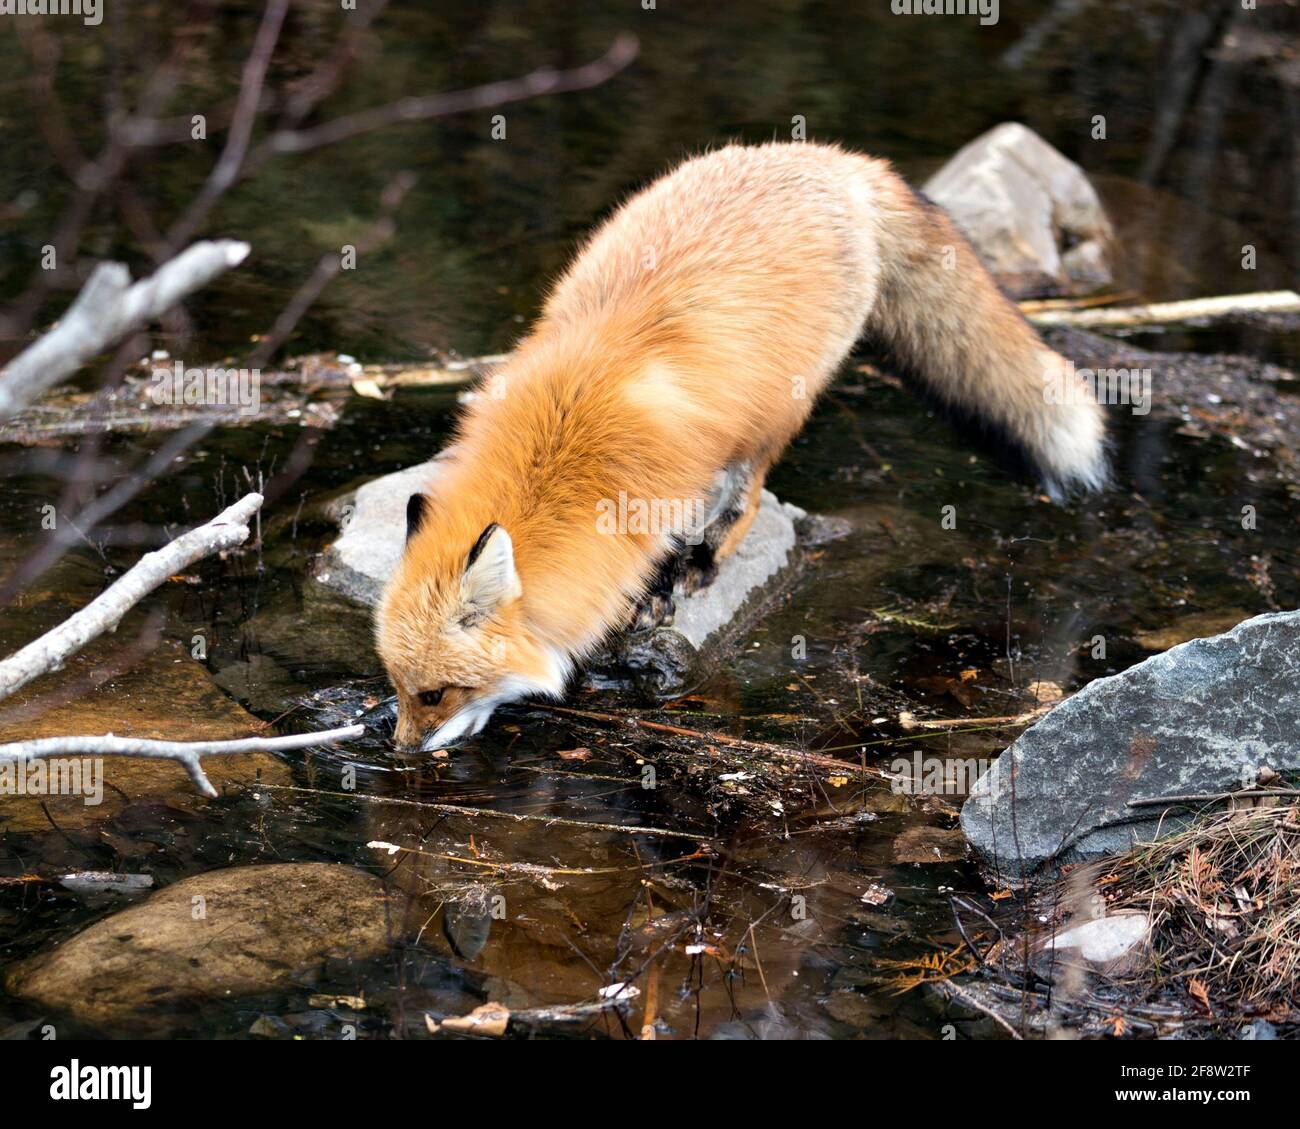 Red Fox close-up playing in the water with its muzzle in the spring season with blur water background in its environment and habitat. Fox Image. Photo. Stock Photo